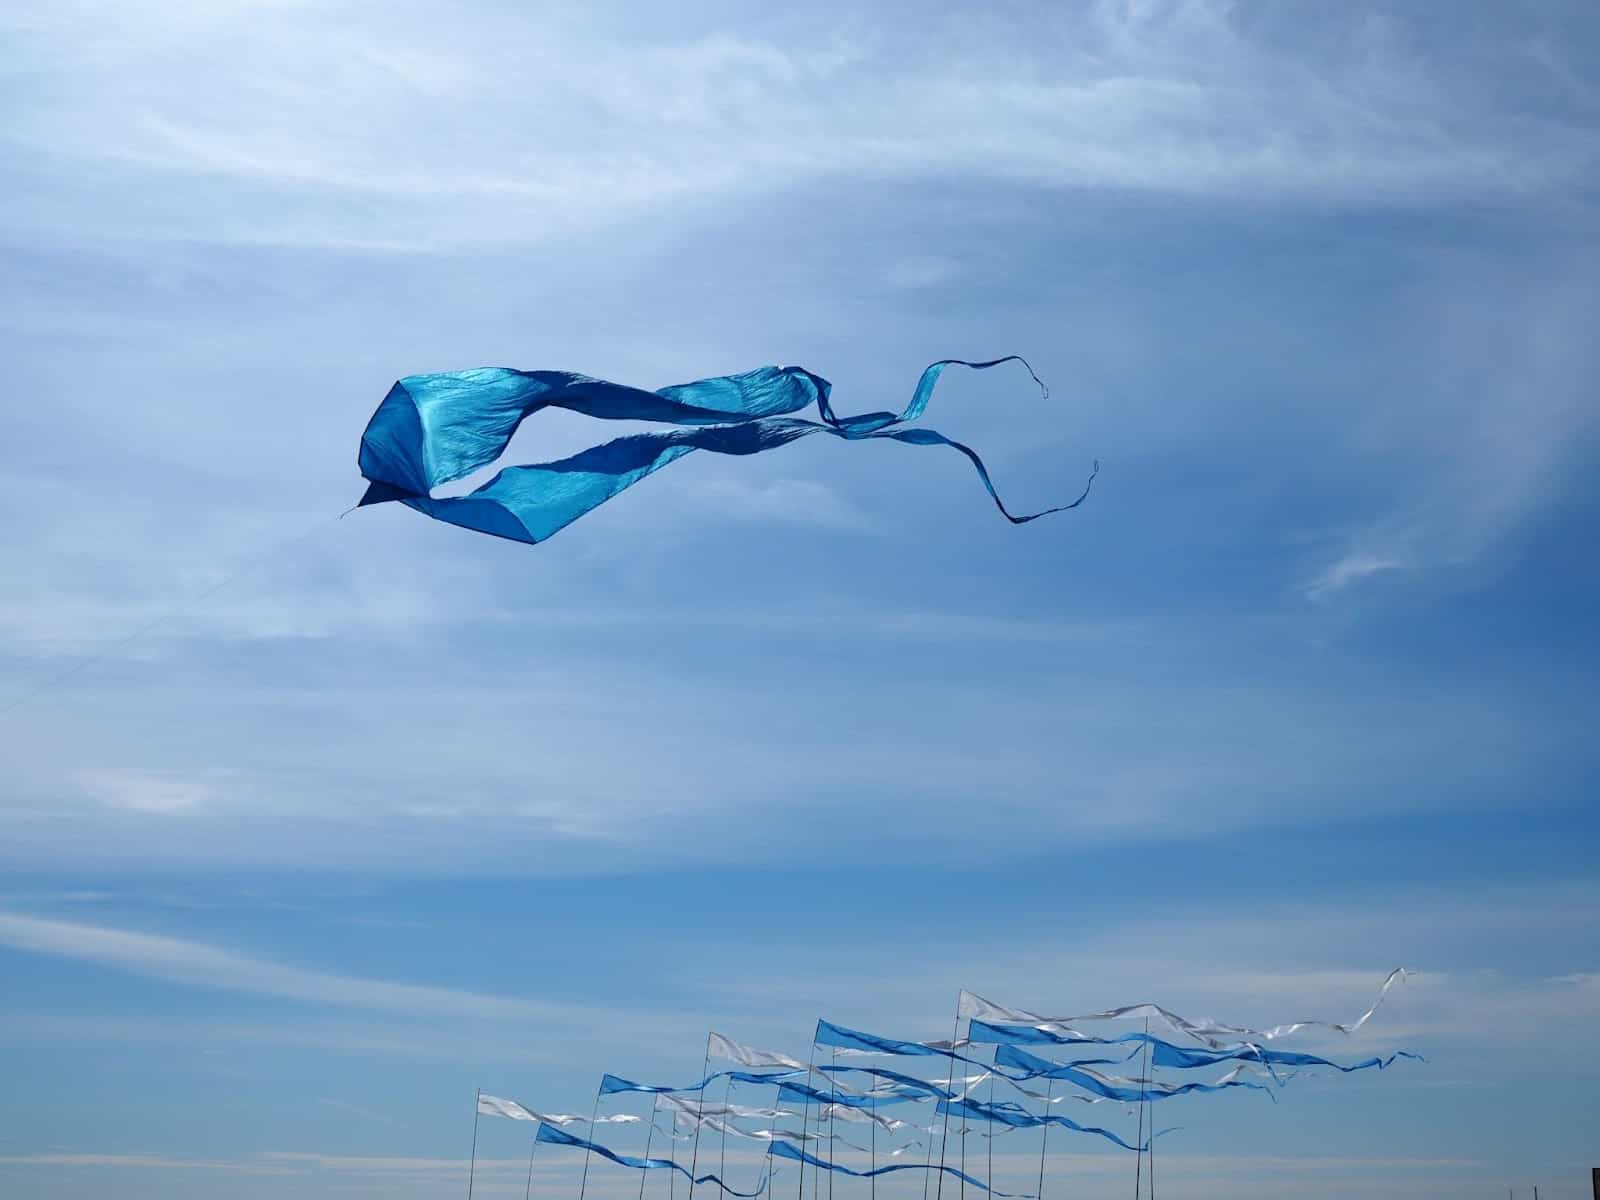 Blue kite in blue sky higher than other blue kites